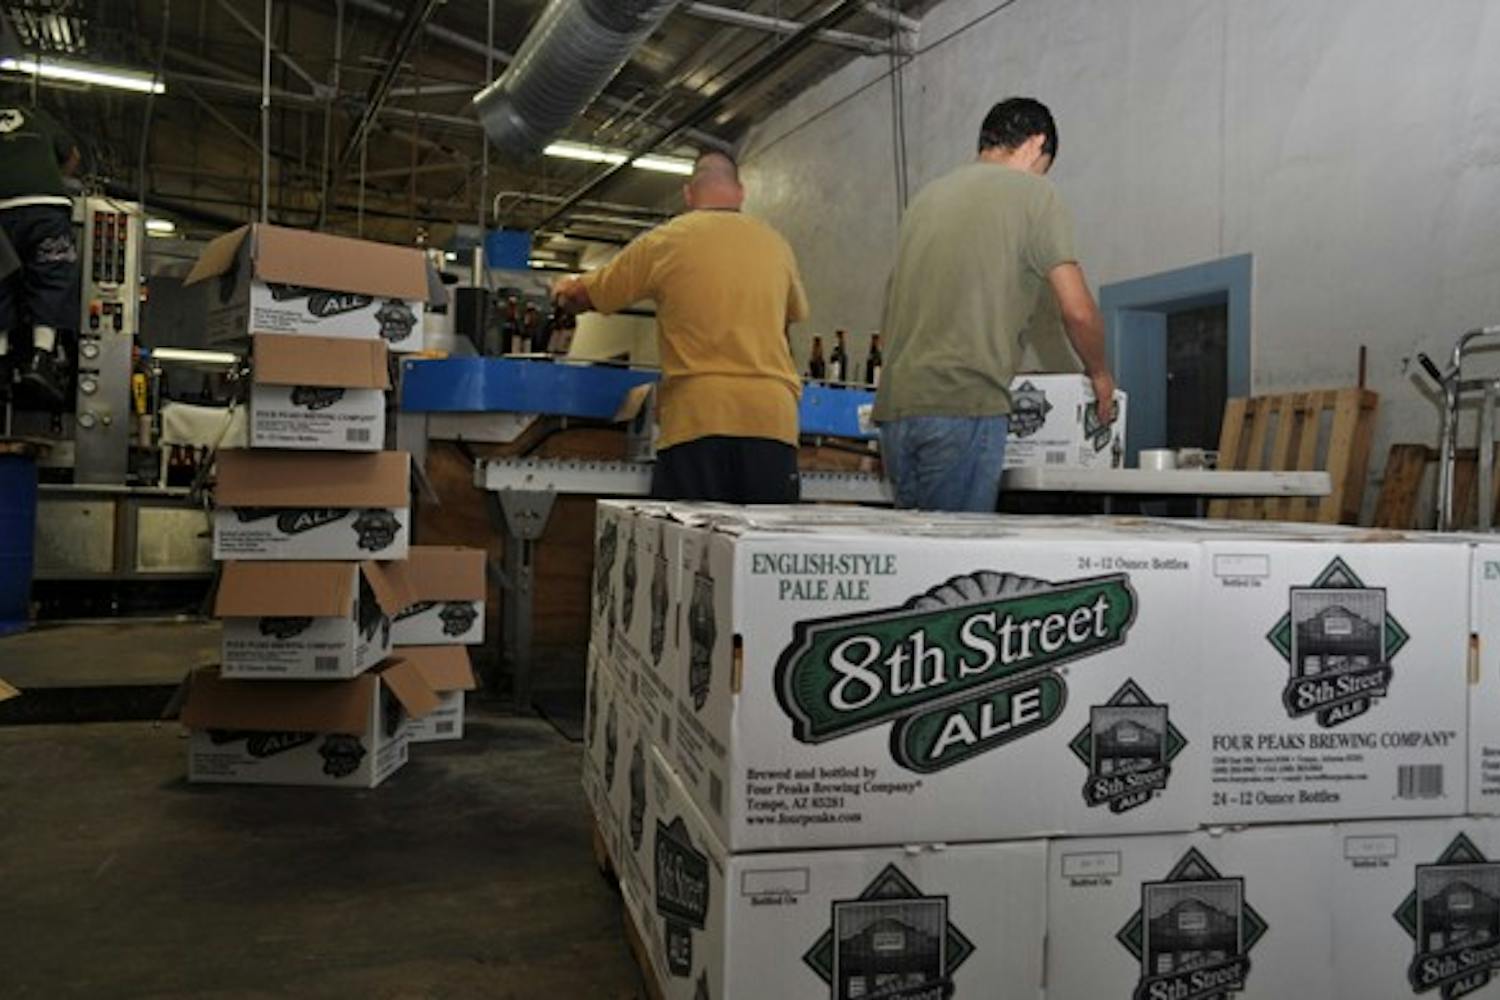 Workers pack up boxes of Ale at Four Peaks Brewery in Tempe. Photo by Alex Forestier.